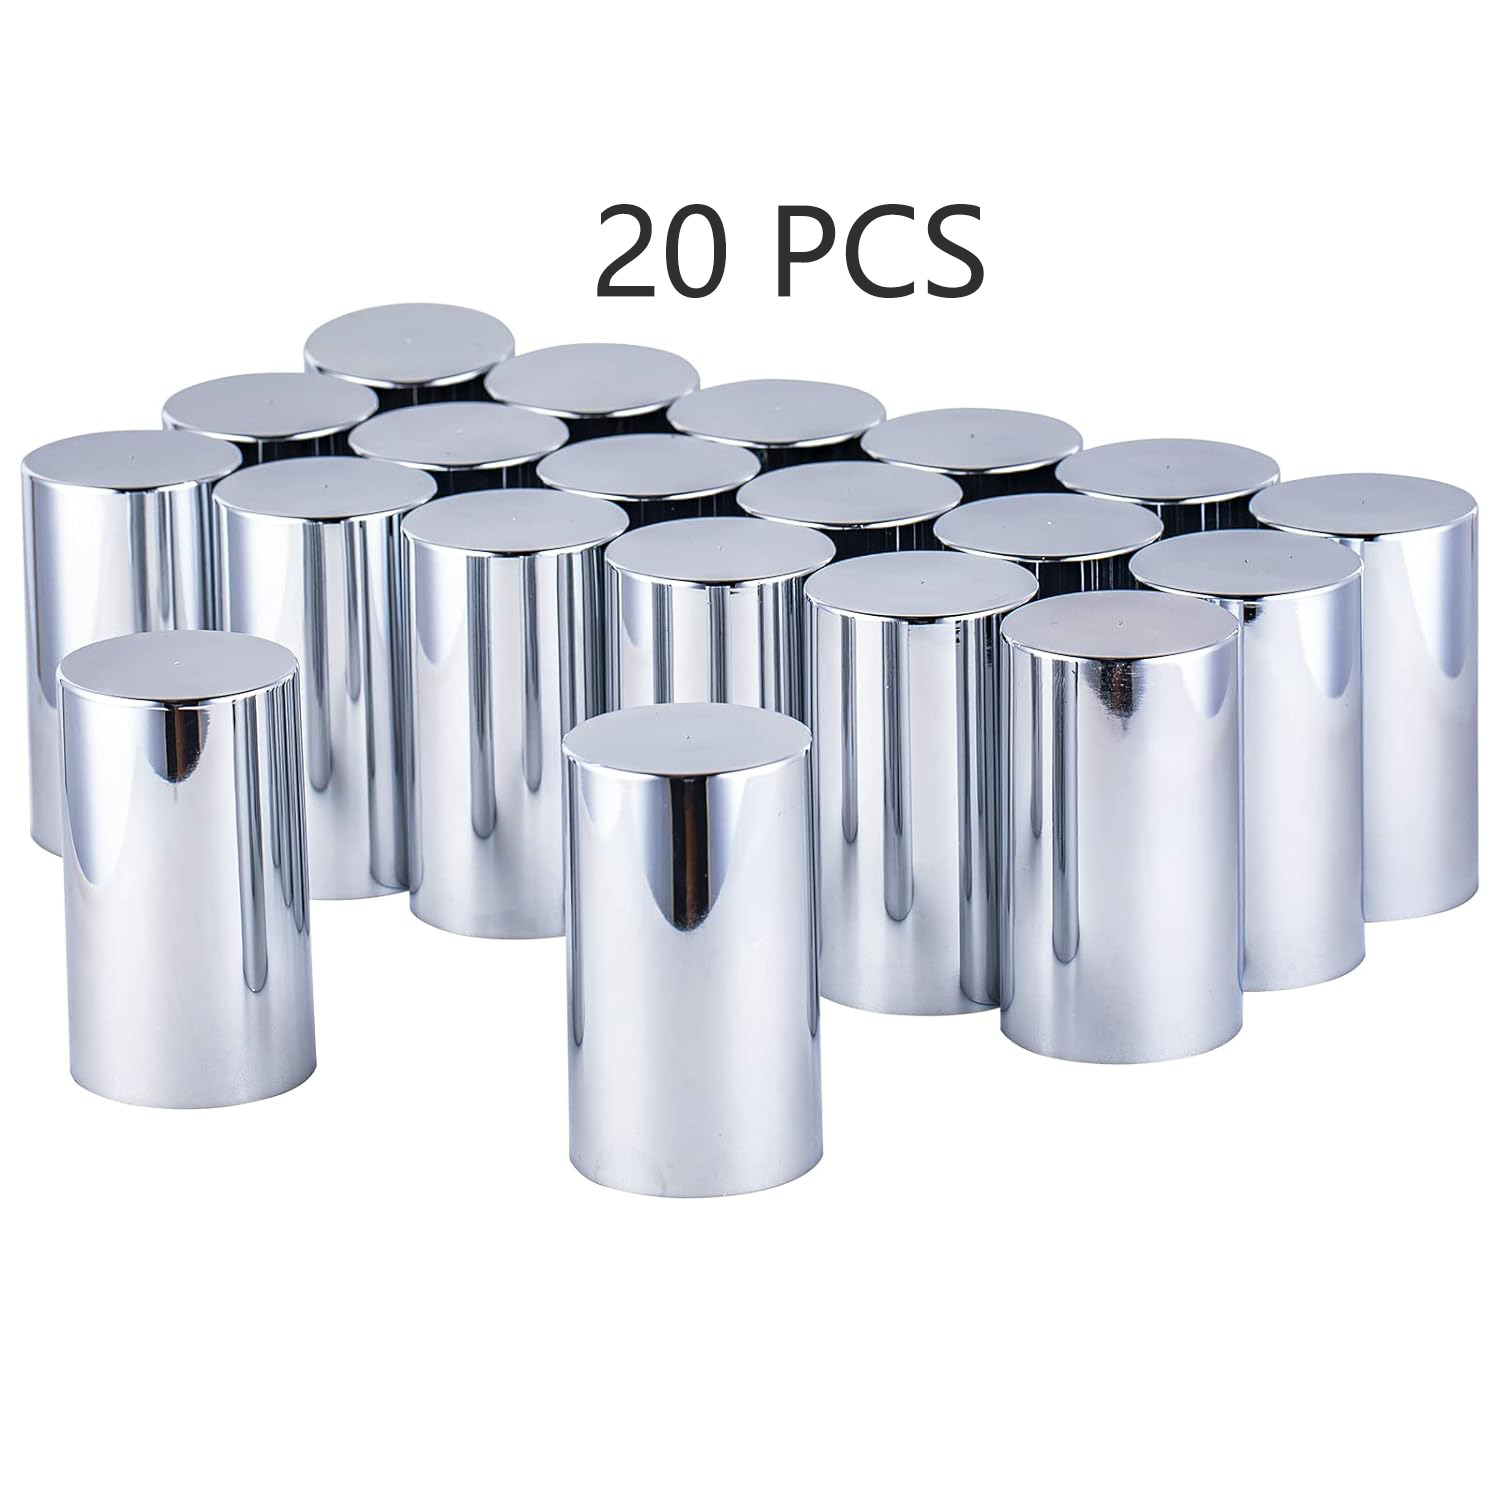 20PCS 33mm Lug Nut Covers Chrome ABS Long Thread-On Cylinder Fits Semi Truck